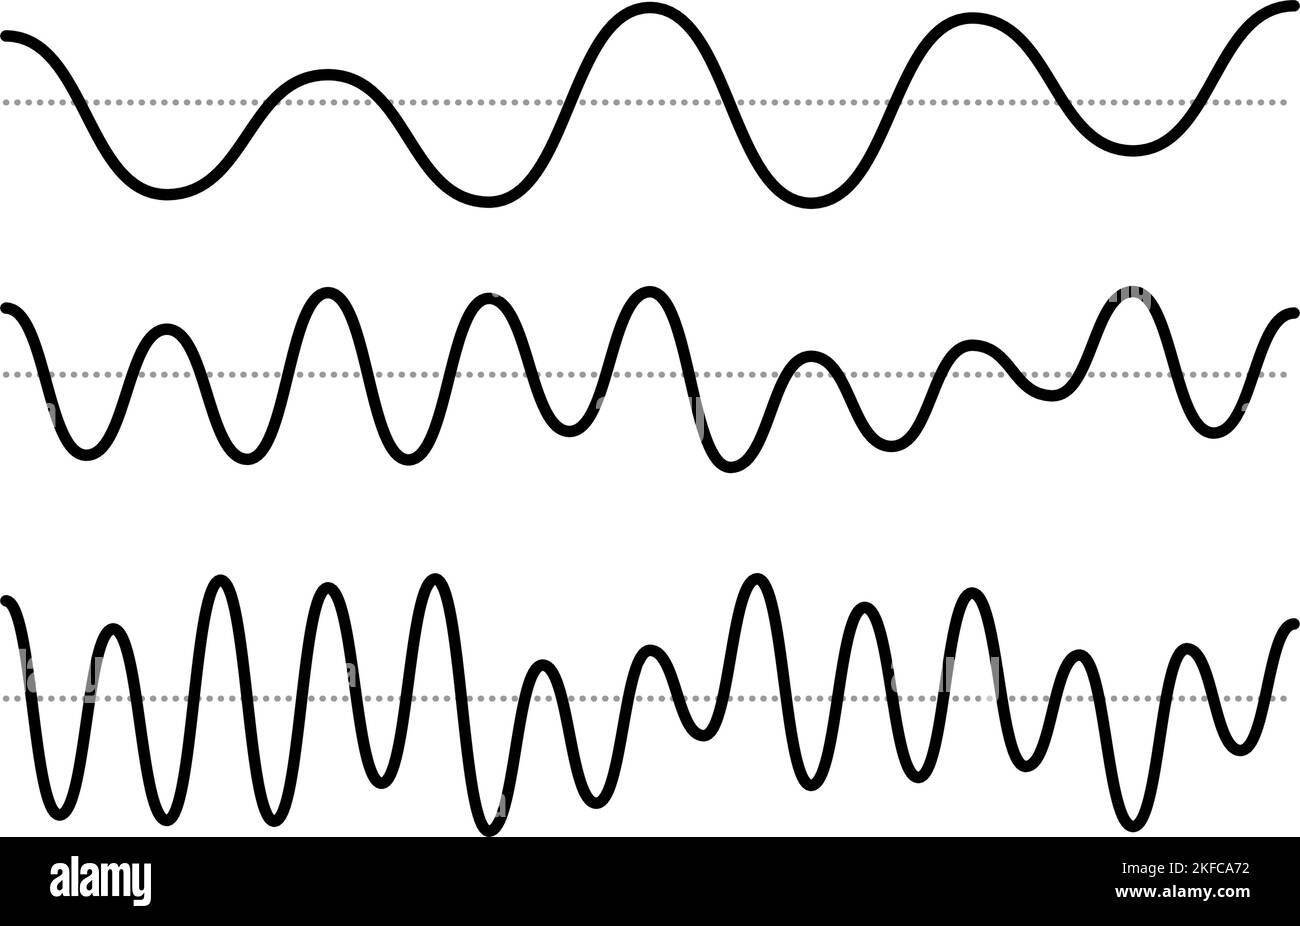 Sinusoid signals set. Black curve sound waves collection. Voice or music audio concept. Pulse lines. Electronic radio signals with different frequency Stock Vector